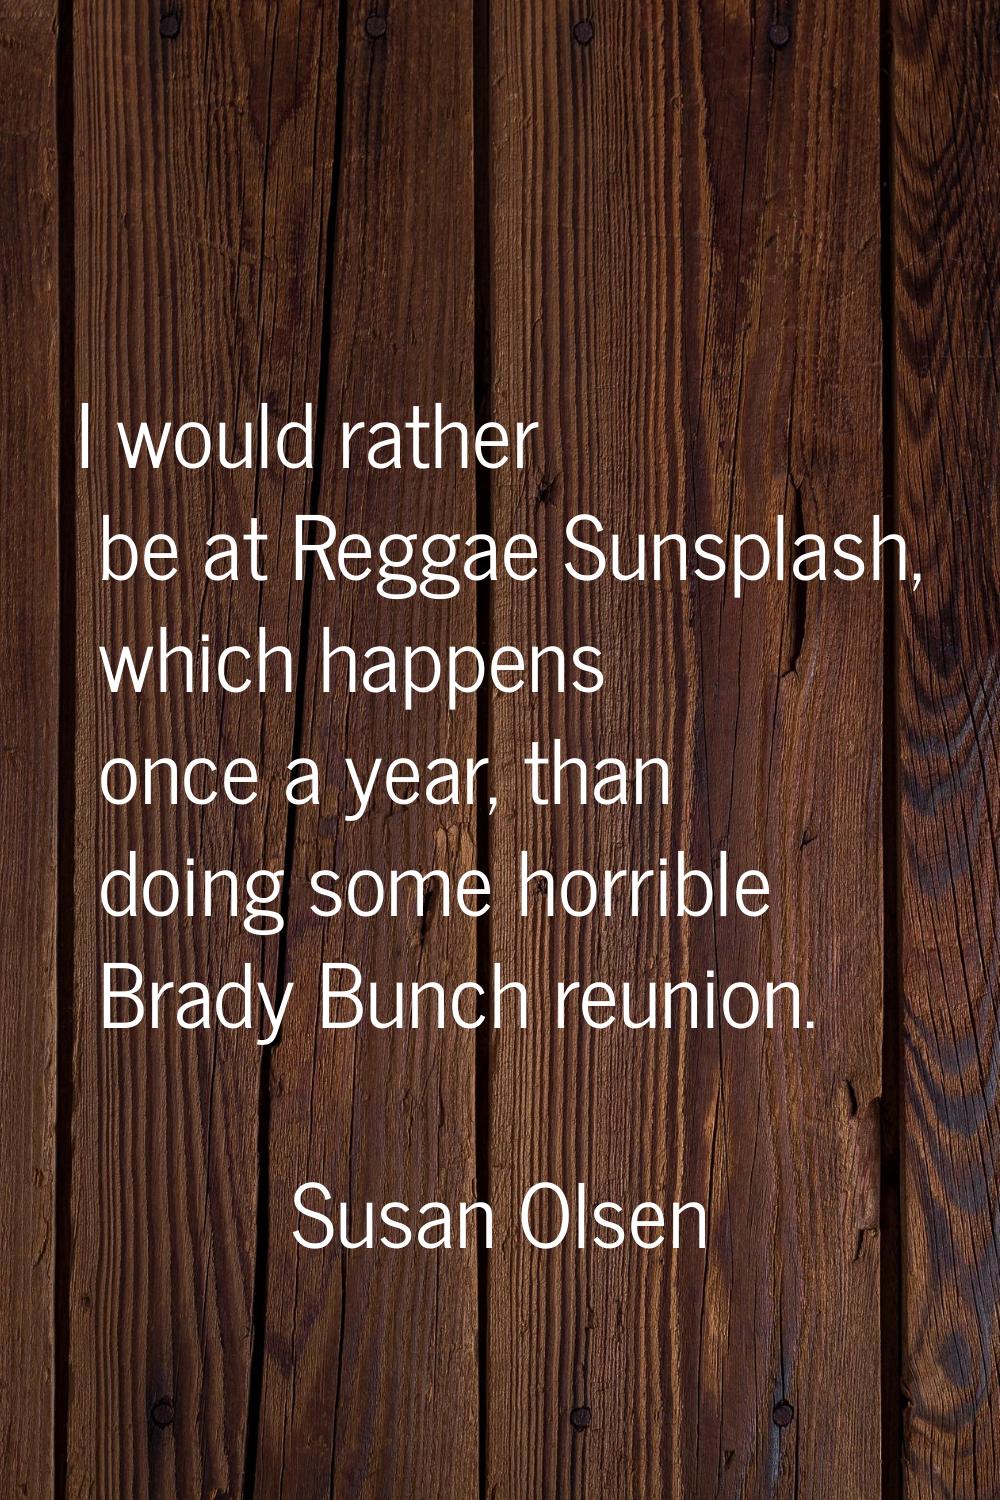 I would rather be at Reggae Sunsplash, which happens once a year, than doing some horrible Brady Bu